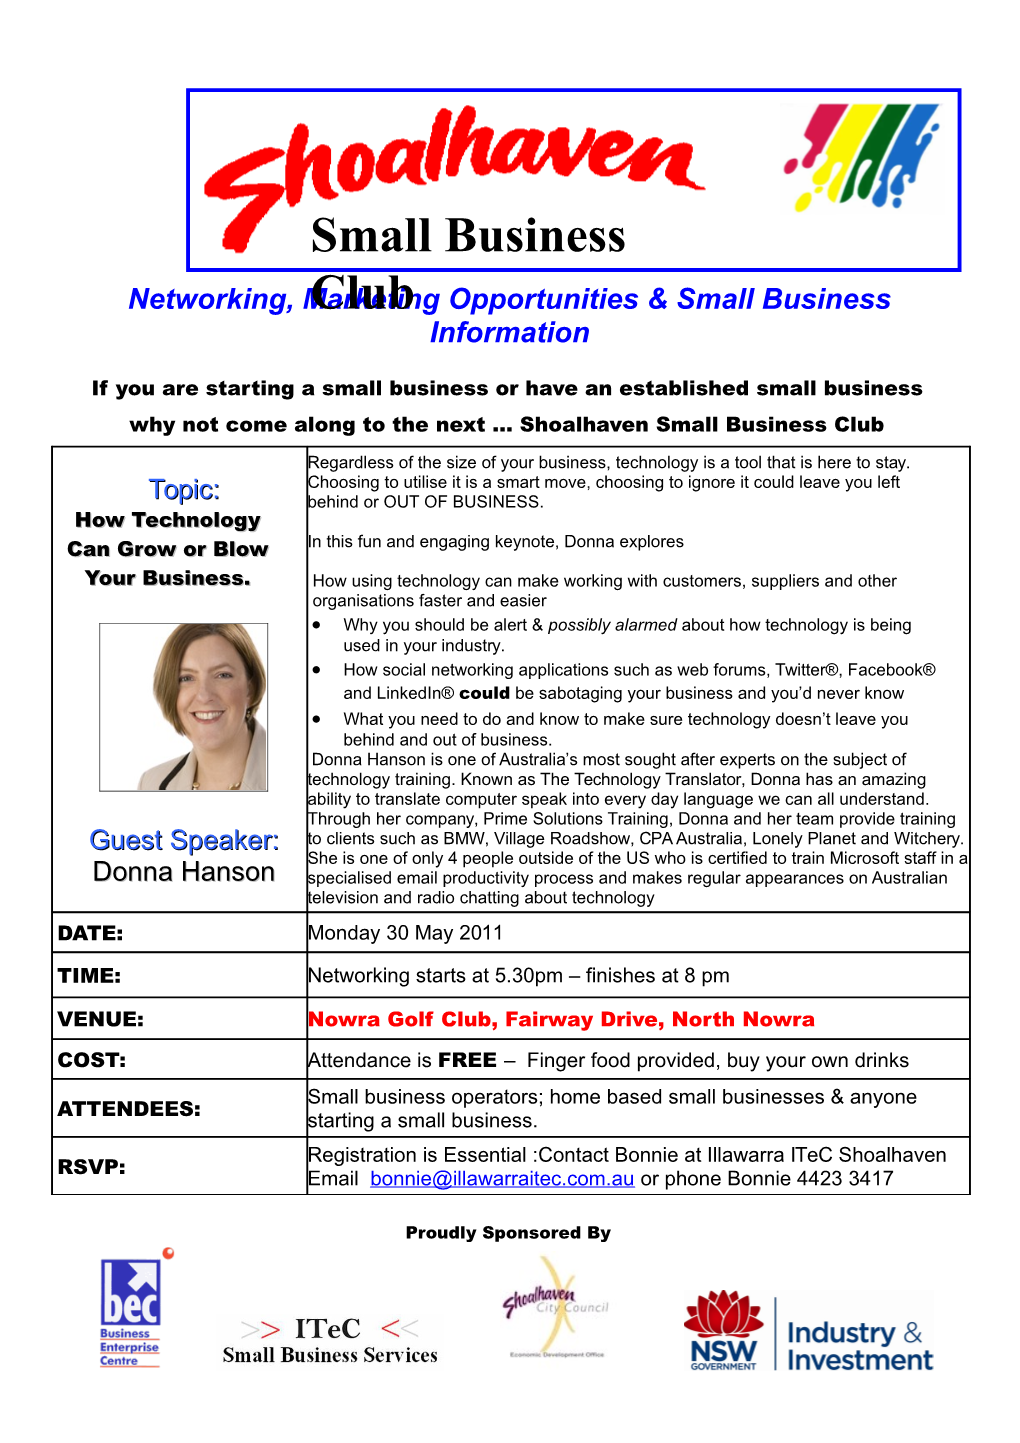 If You Are Starting a Small Business Or Have an Established Small Business